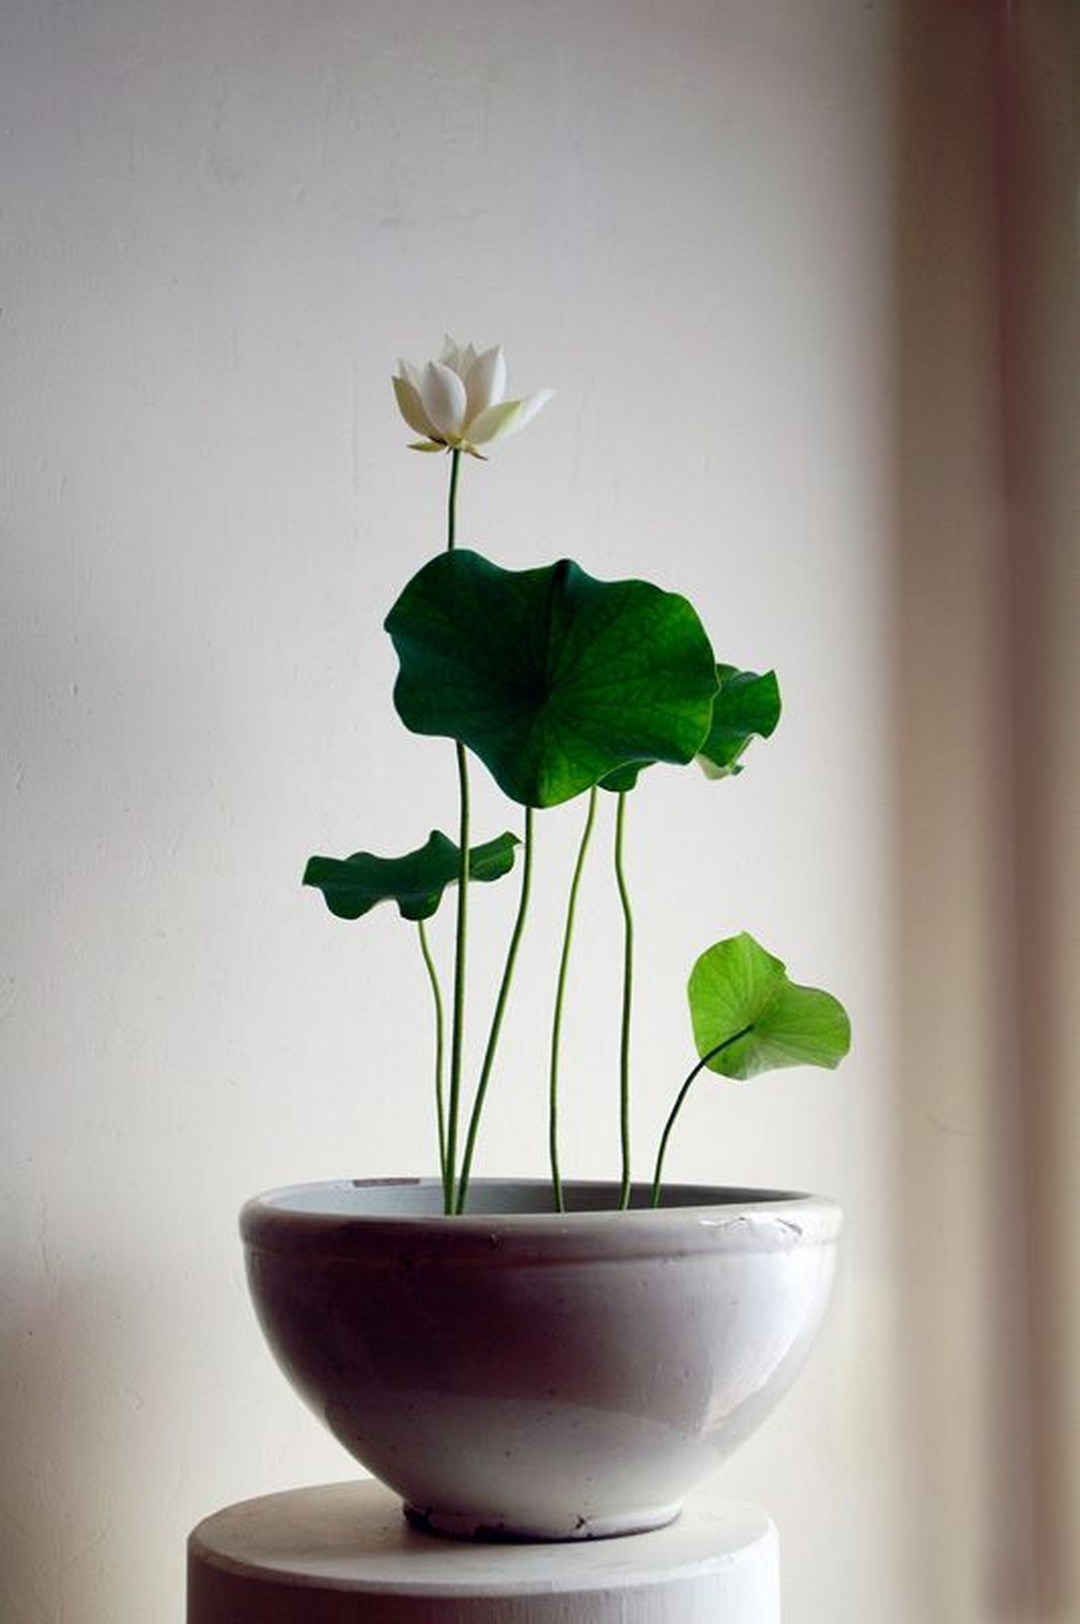 6 reasons to get houseplants now - # 06 Plants are pretty | photograph via onechitecture